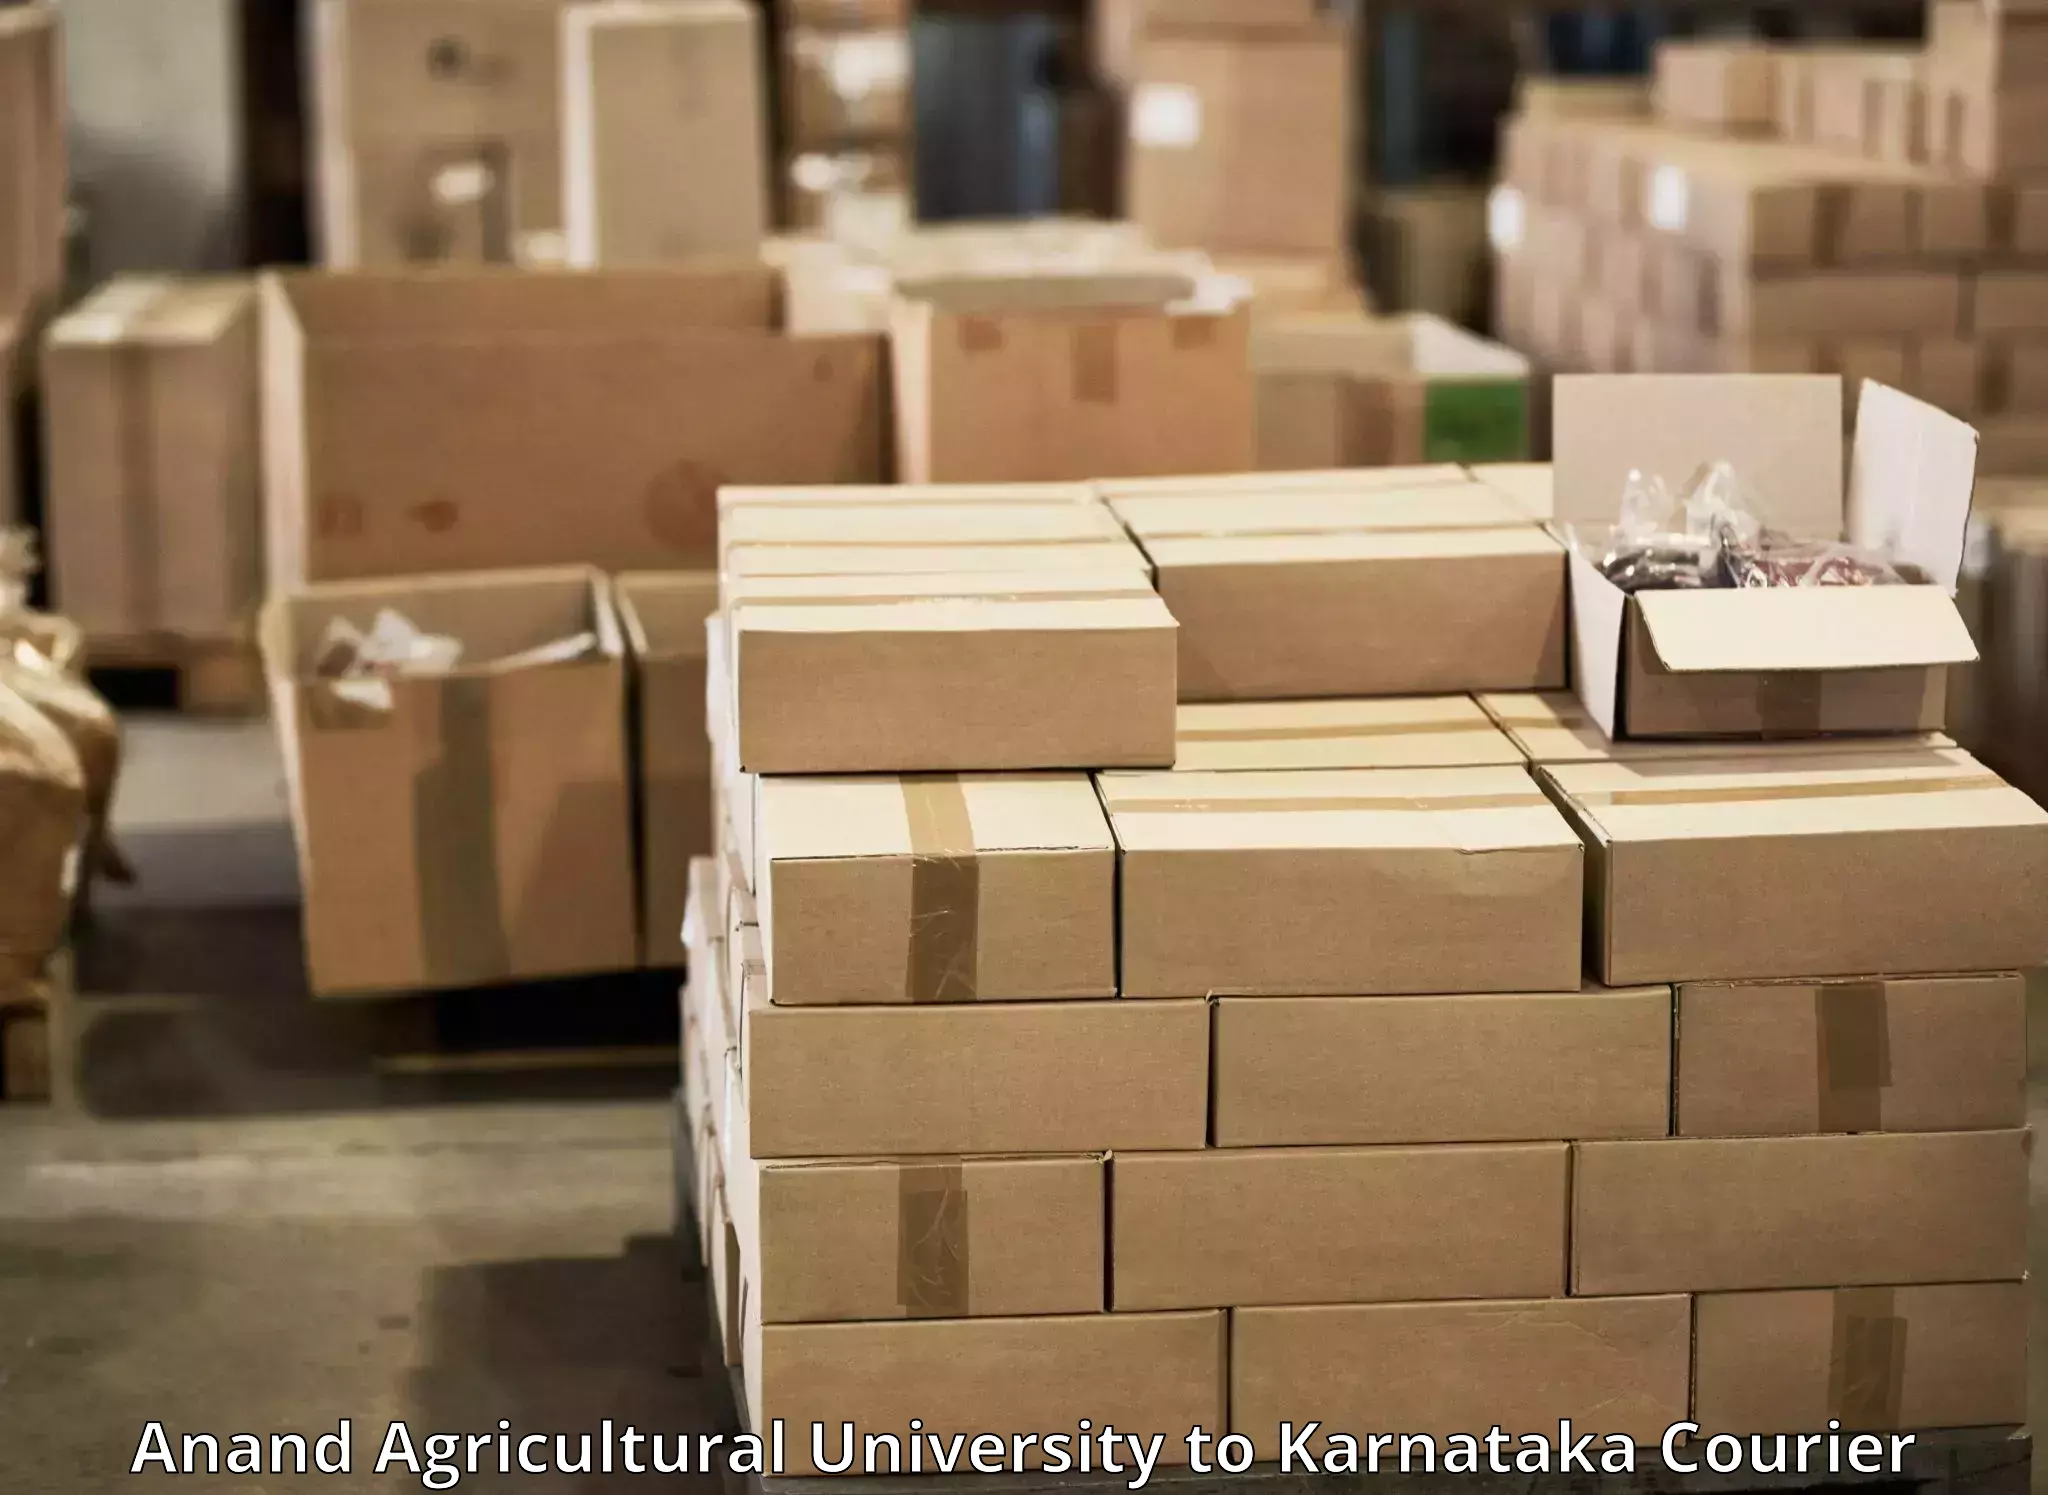 Multi-carrier shipping Anand Agricultural University to Malavalli